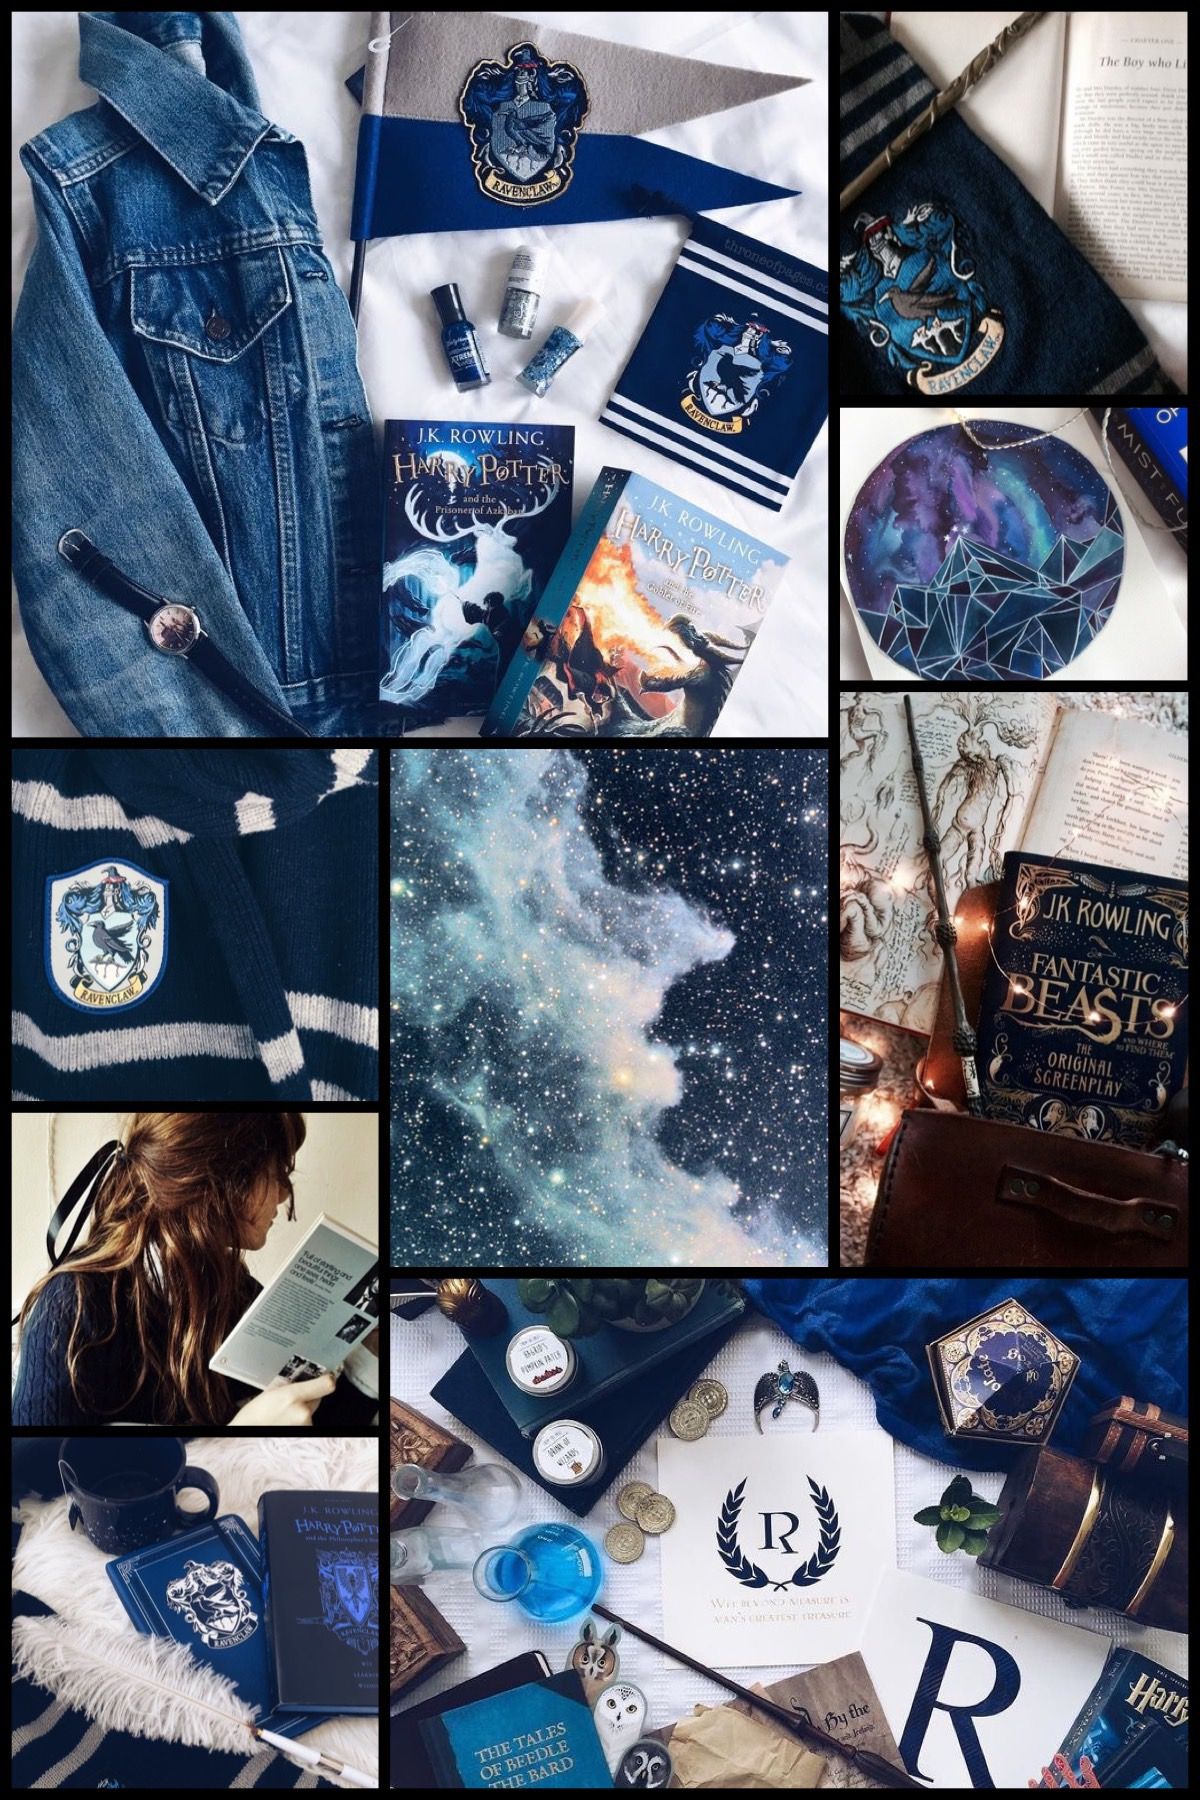 Ravenclaw Aesthetic Wallpapers